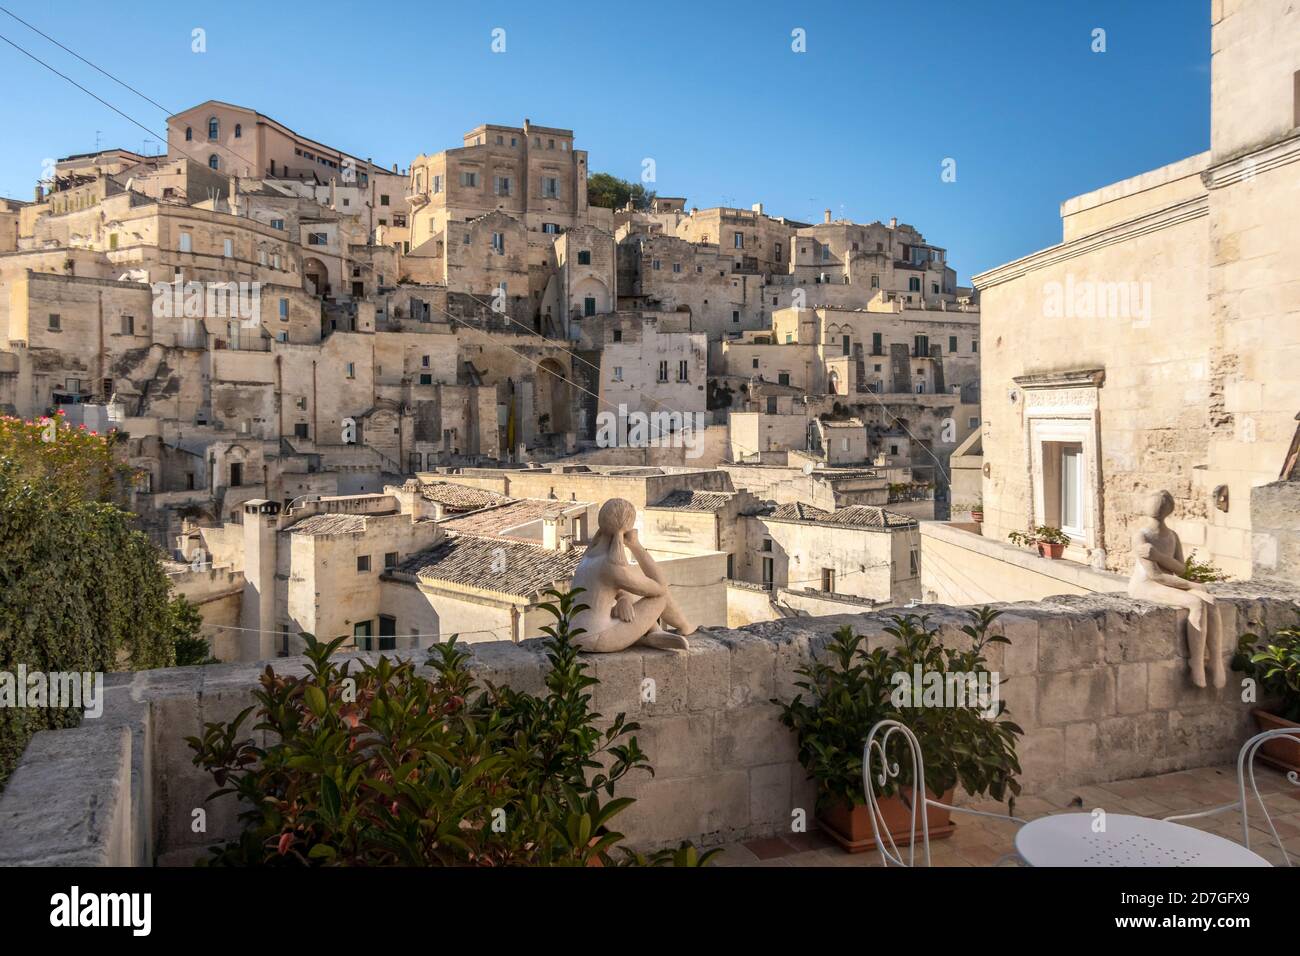 A small courtyard patio with tables and two modern art sculptured figures with the city village behind in the ancient sassi city of Matera, Italy. Stock Photo